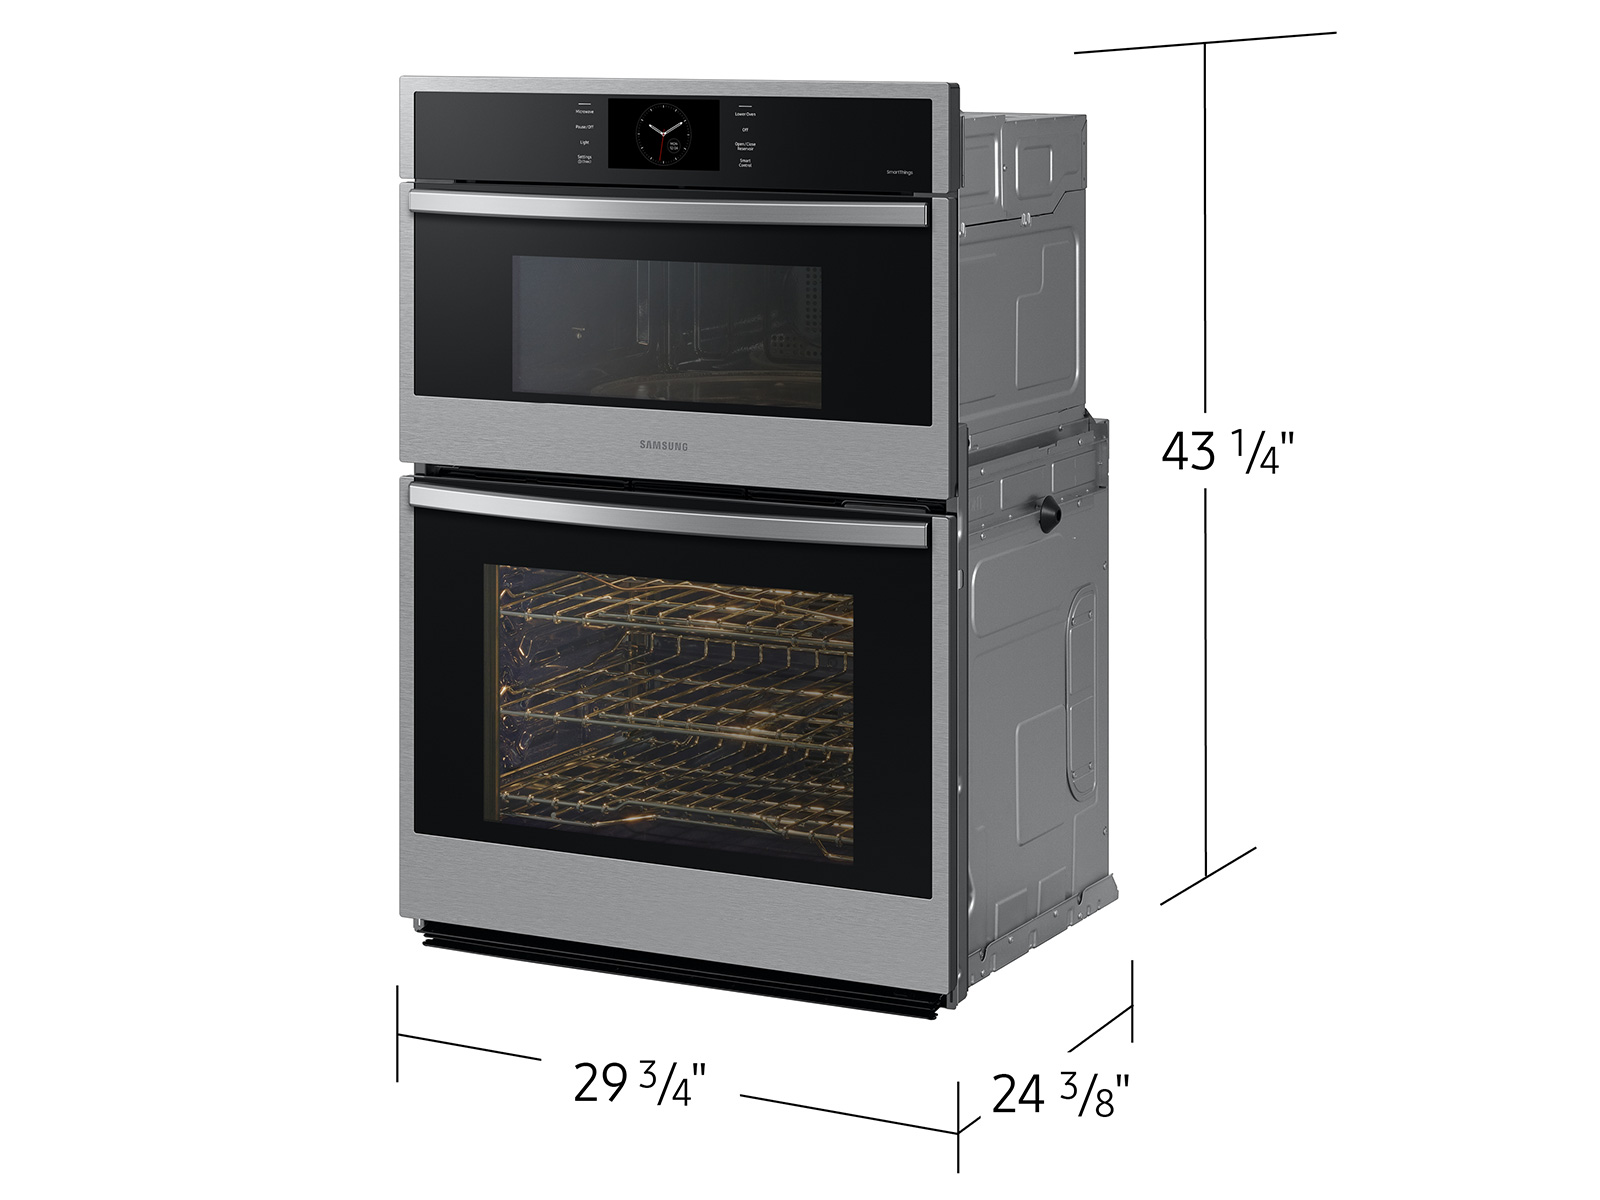 What Is the Proper Distance to Separate a Microwave & a Range Top?